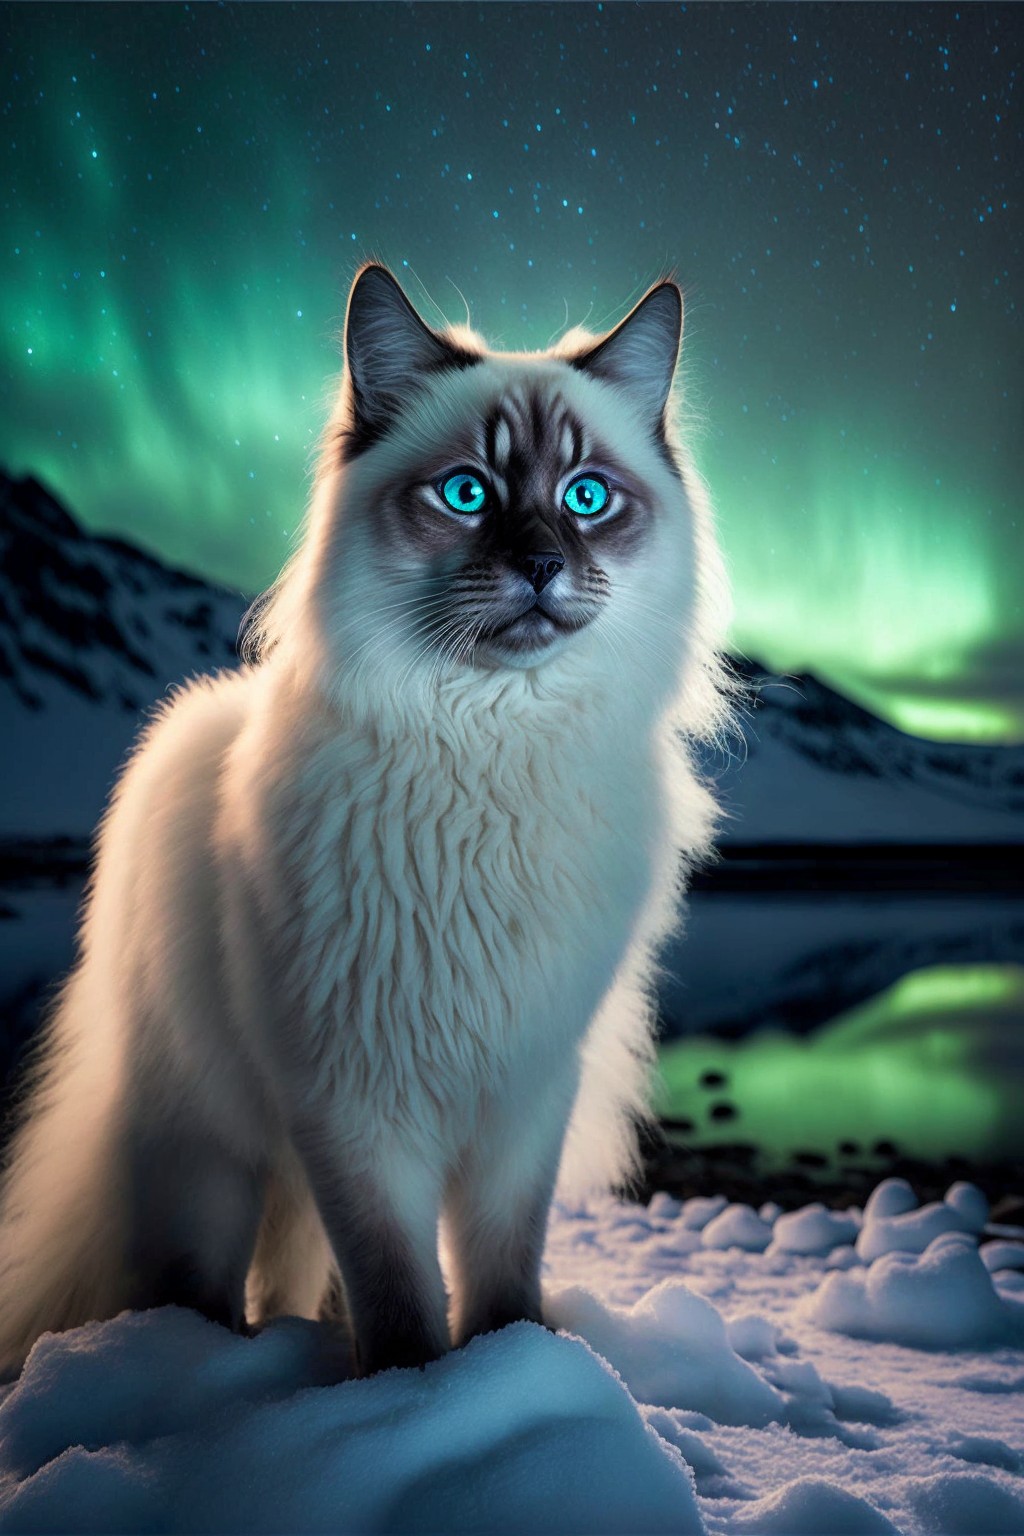 Snow cat under the northern lights